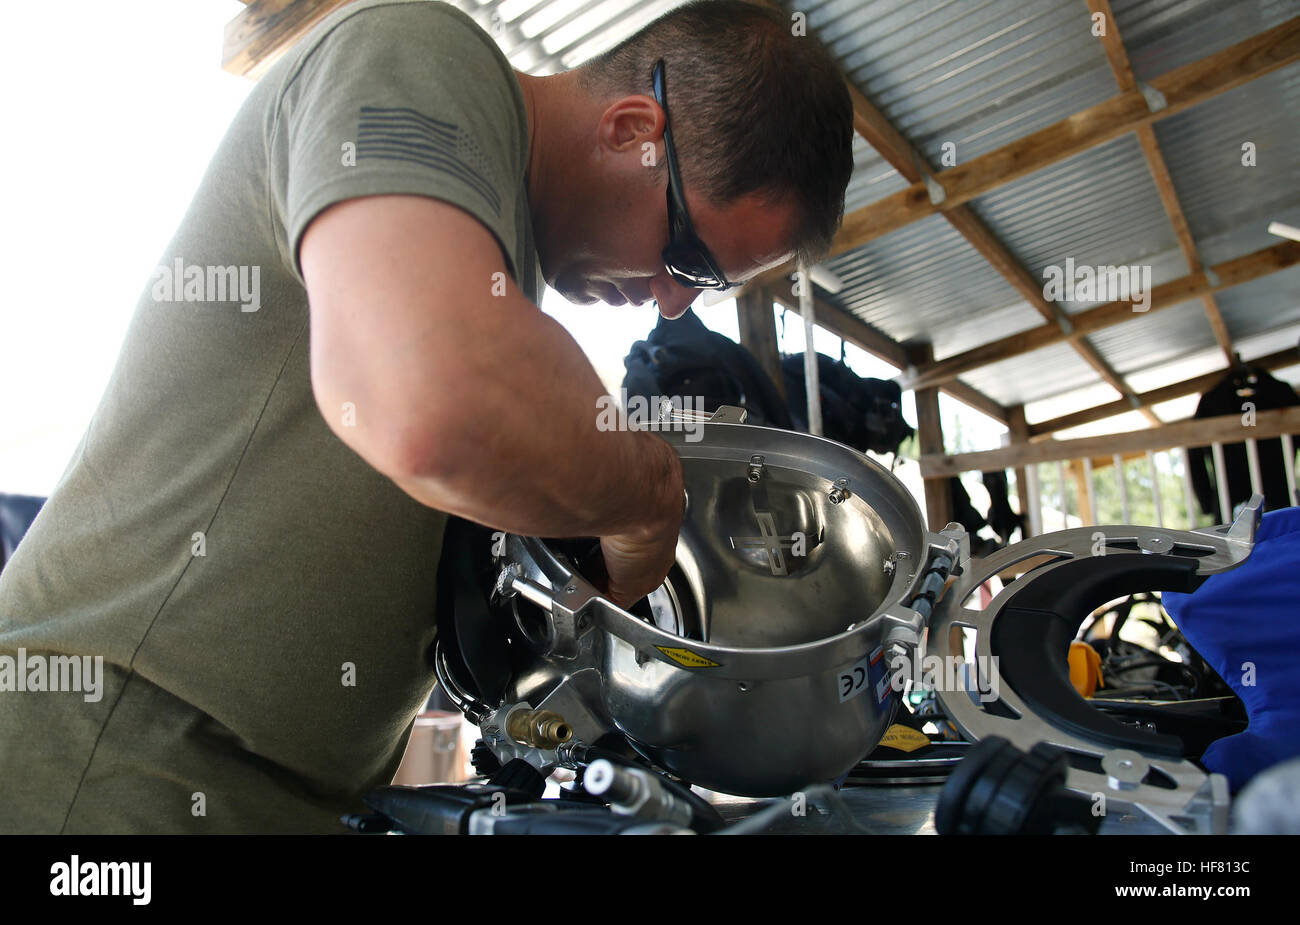 U.S. Border Patrol BORSTAR diver Juan Verdura inspects a Kirby Morgan diving helmet as he and his fellow divers stow away dive equipment after completing two weeks of advanced div training in Panama City, Fla., May 27, 2016.  by Glenn Fawcett Stock Photo